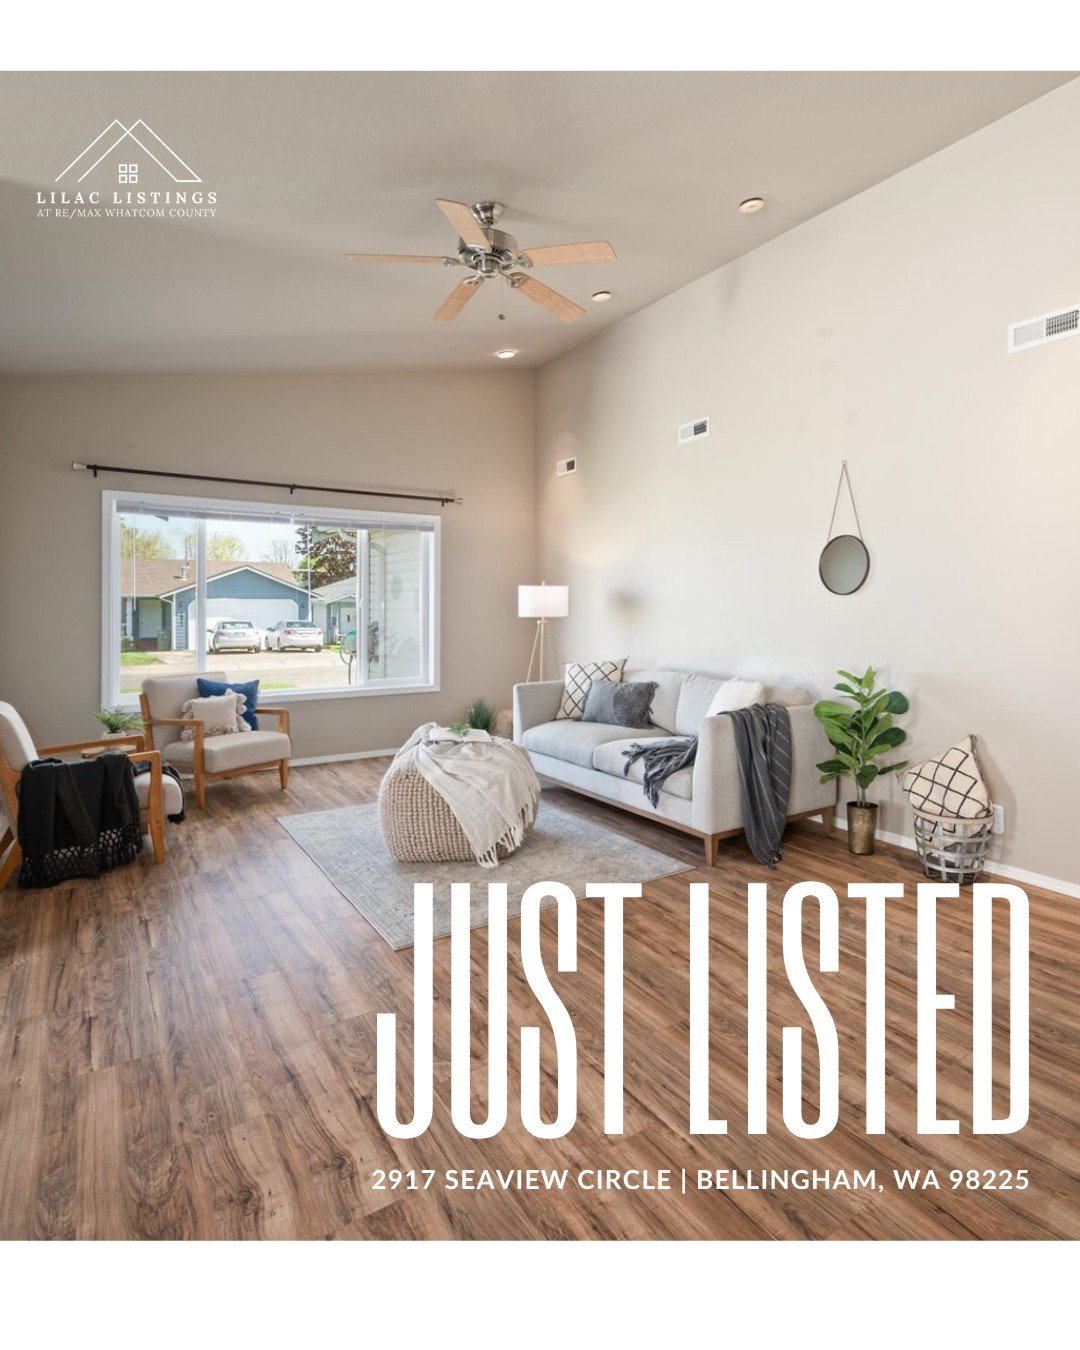 Welcome to 2917 Seaview Circle! Effortless living for entry-level buyers or those looking to downsize. 🏡✨

👉Find out more via the link in OUR BIO!

Come discover a spacious backyard for entertaining and play! Inside, enjoy vaulted ceilings and beau